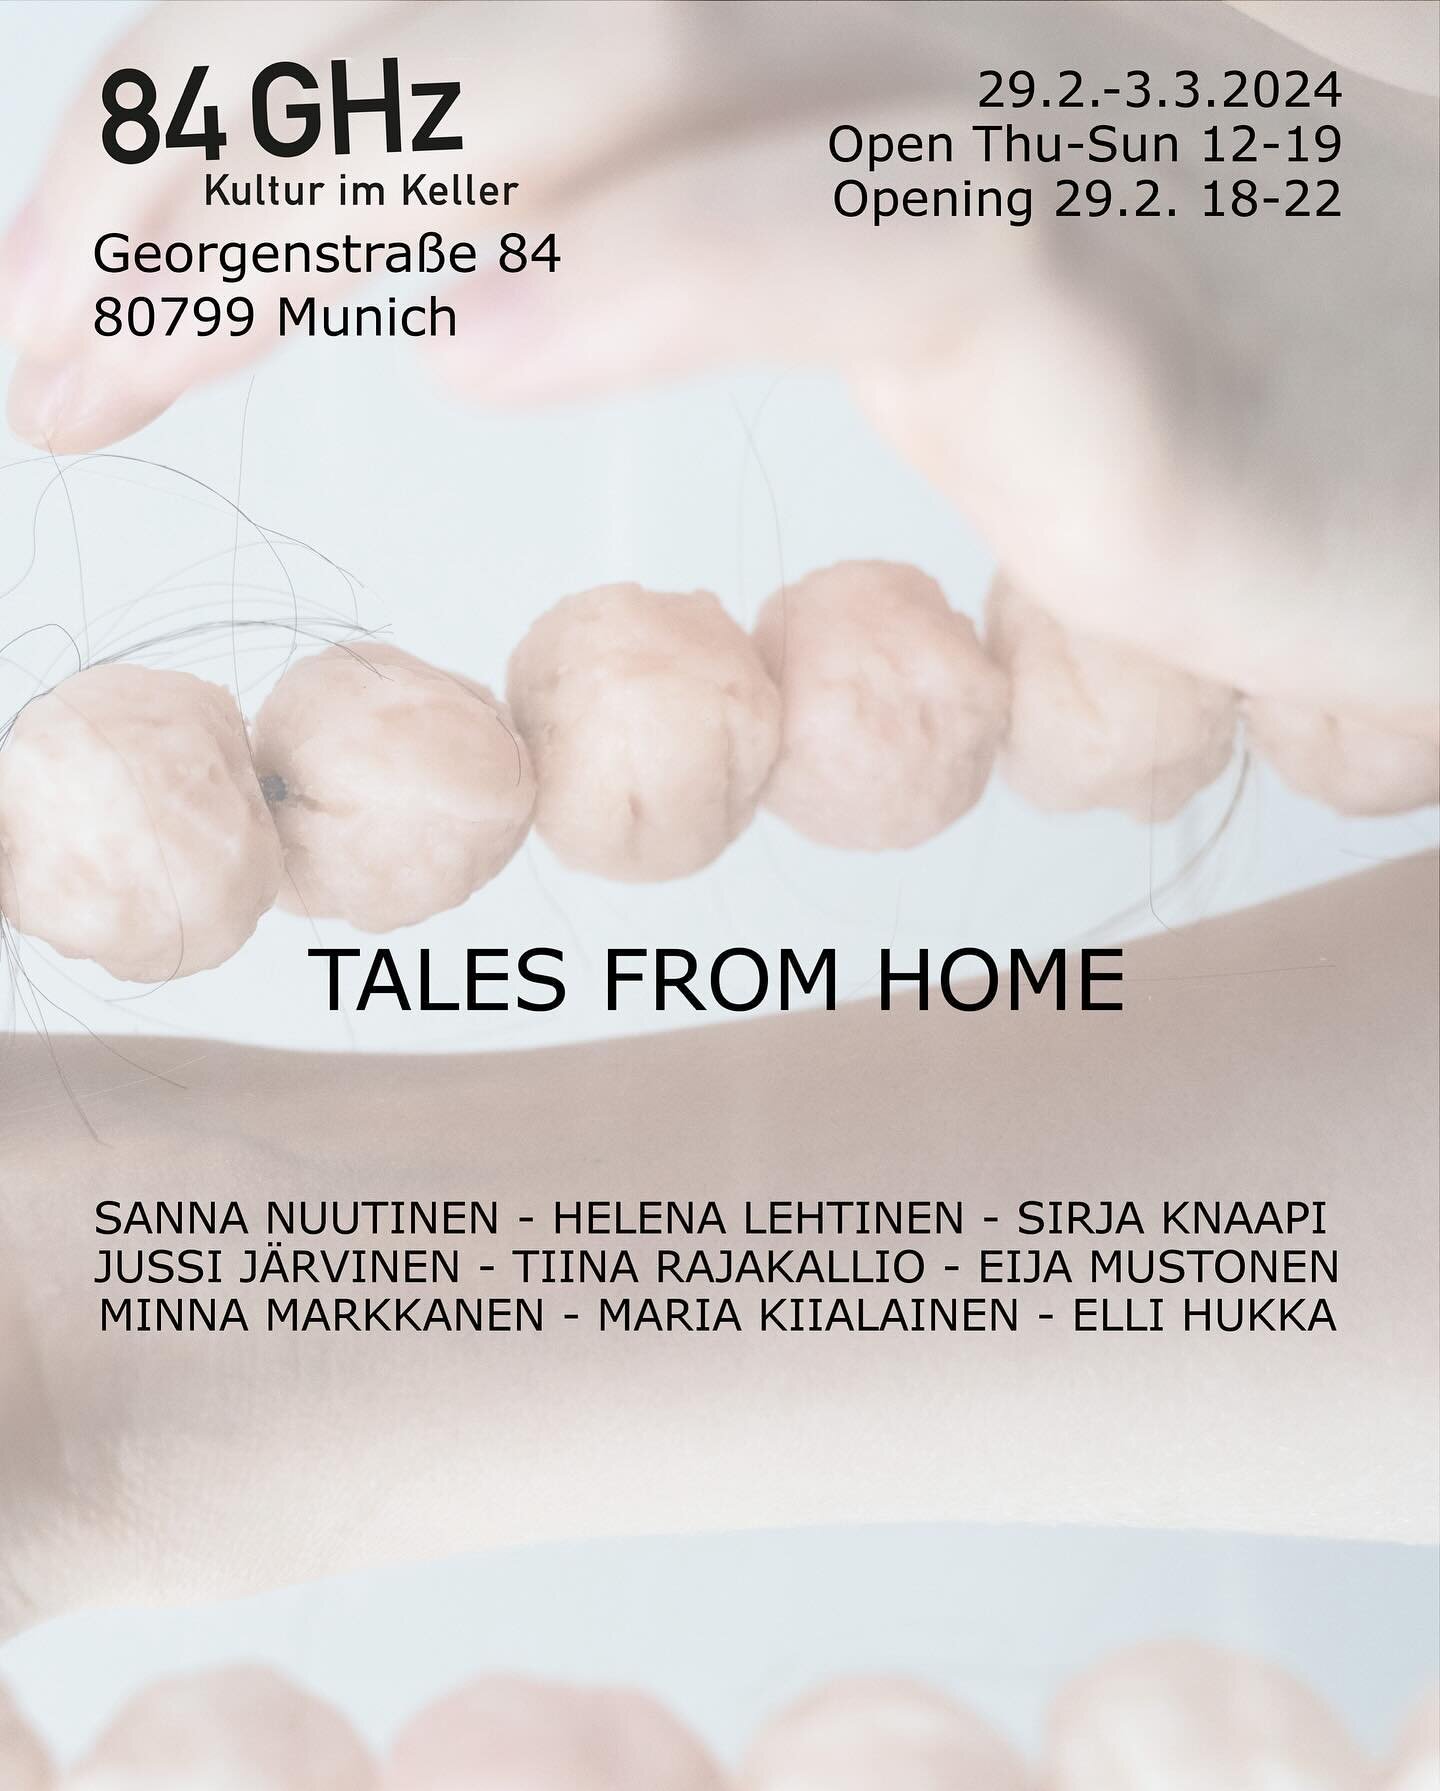 I was invited to exhibit in Munich jewellery week this year with a great group of Finnish jewellery artists. Our exhibition &rdquo;Tales from home&rdquo; at gallery 84GHz, Georgestra&szlig;e 84. Opening is on Thursday 29th 18-22 and Friday-Saturday w